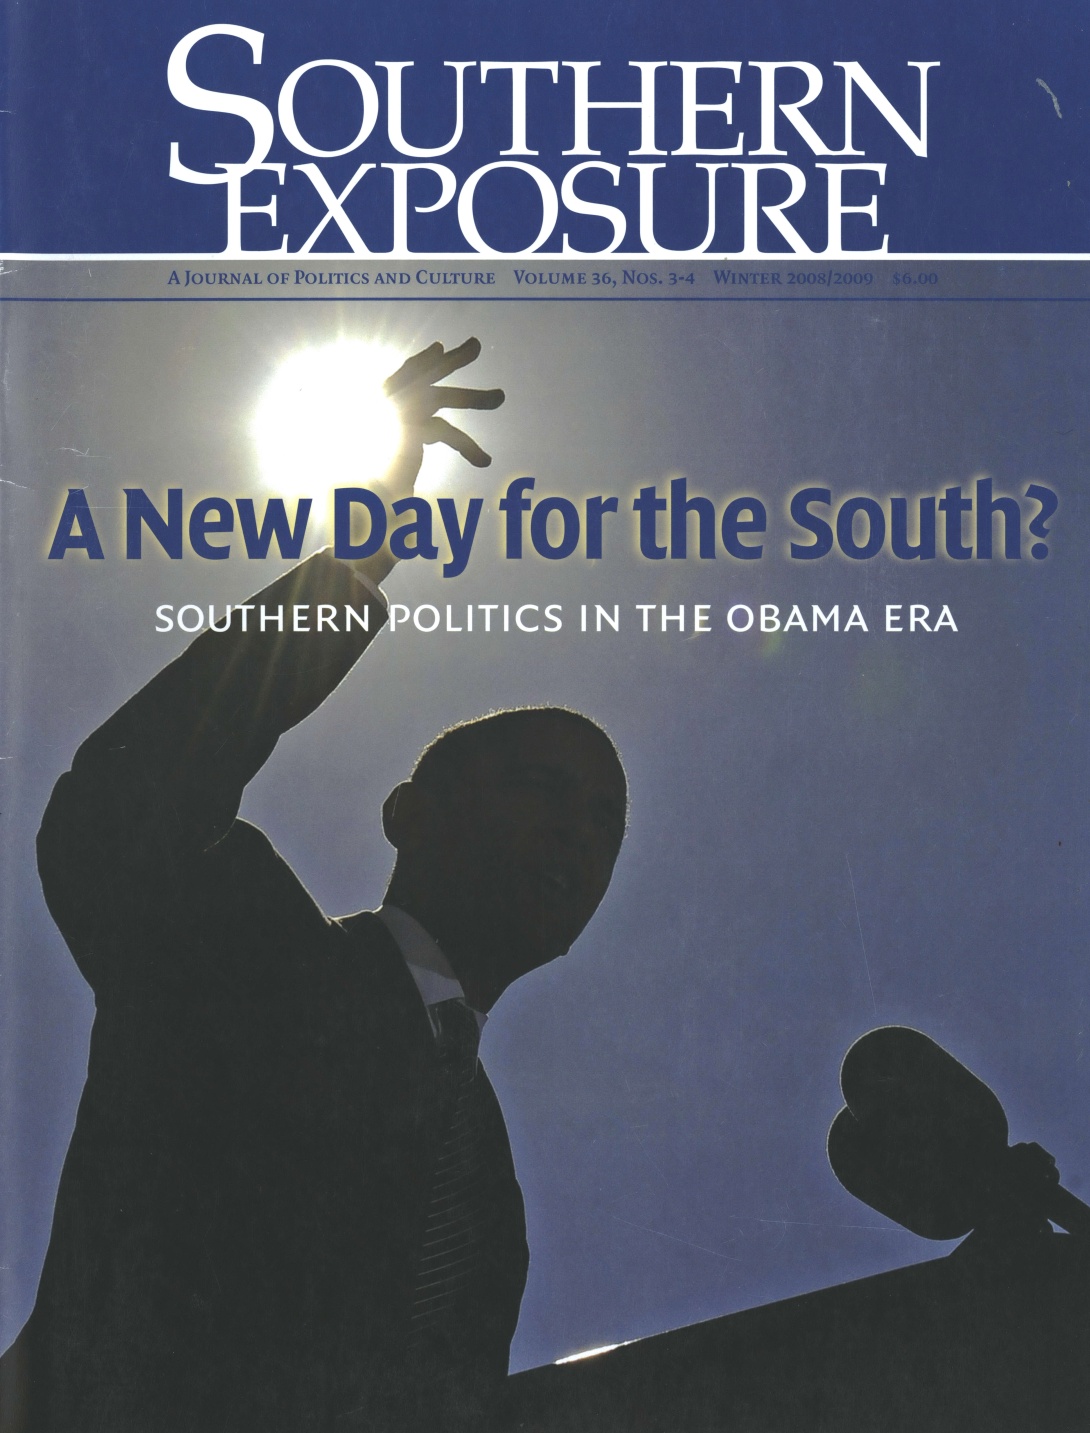 Magazine cover with backlit photo of Barack Obama giving a speech, text reads "A New Day for the South? Southern politics in the Obama era"